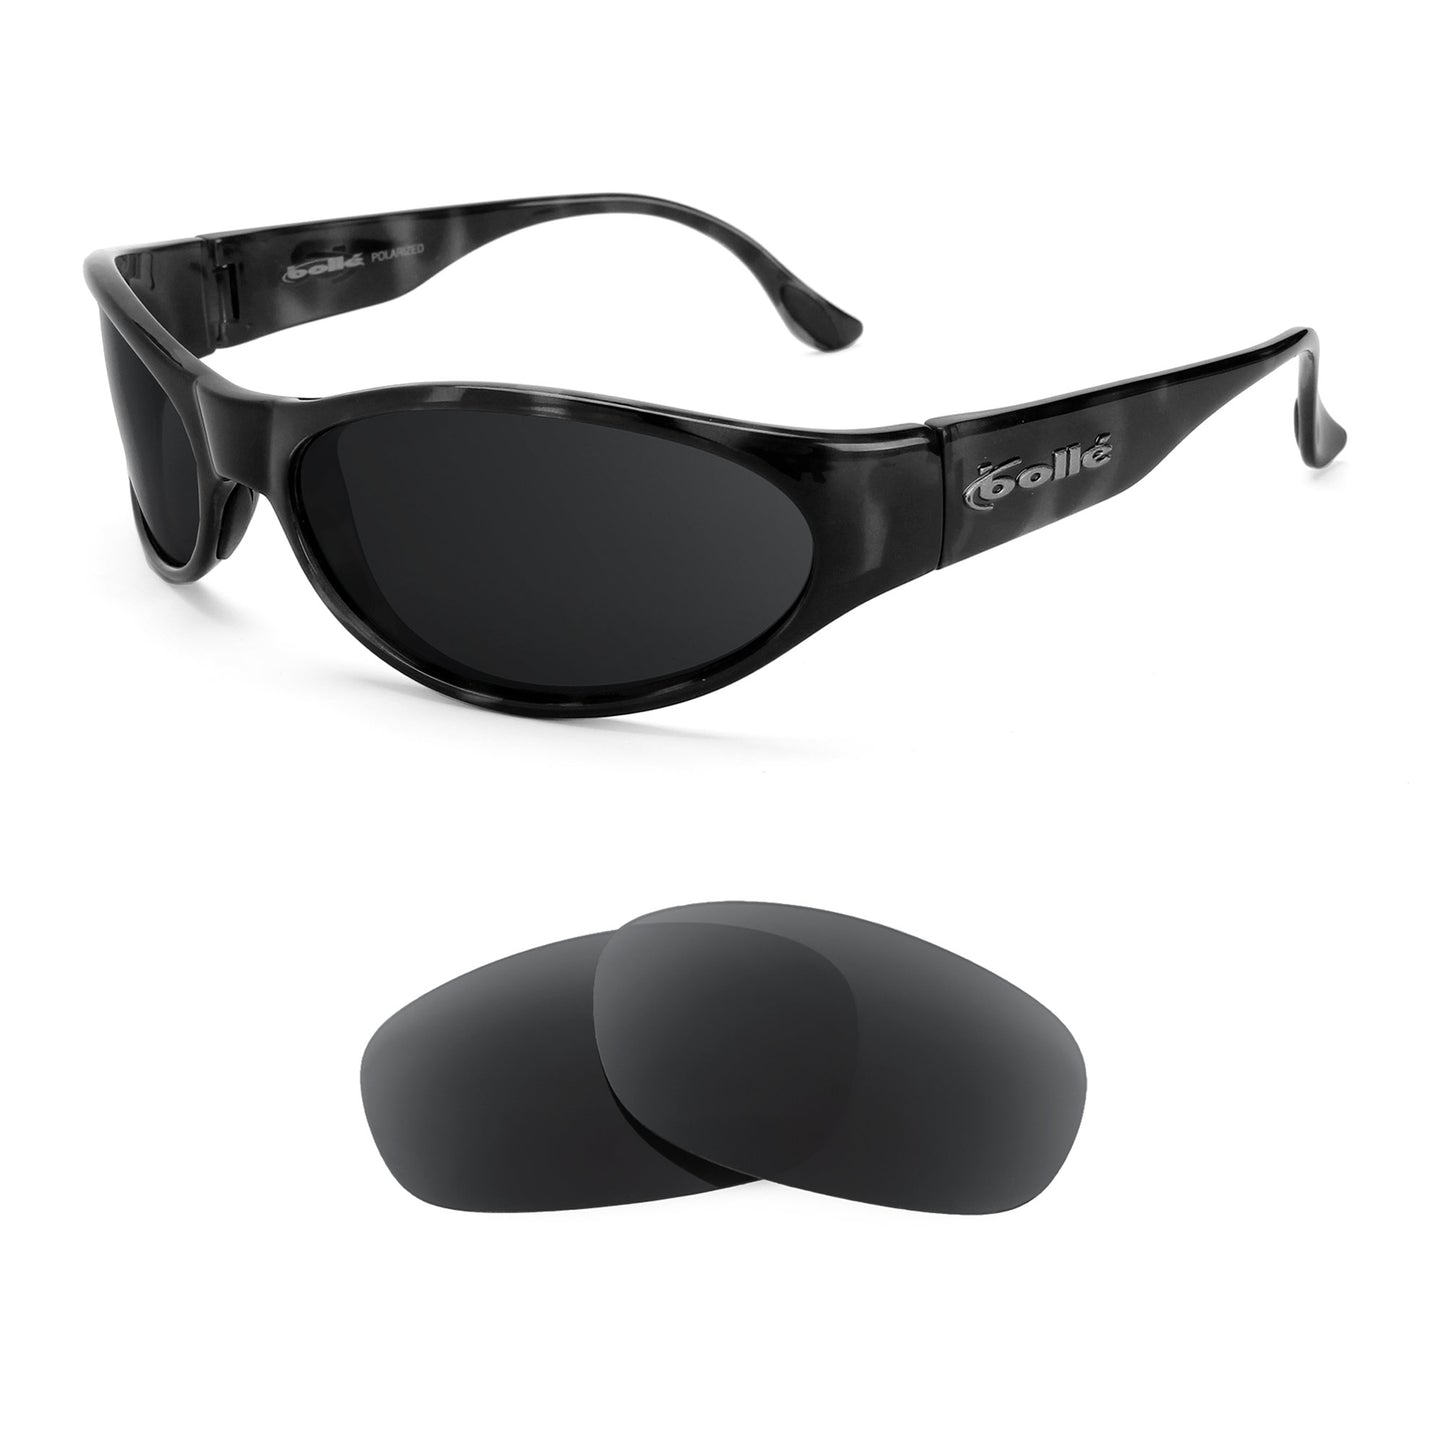 Bolle Piraja sunglasses with replacement lenses